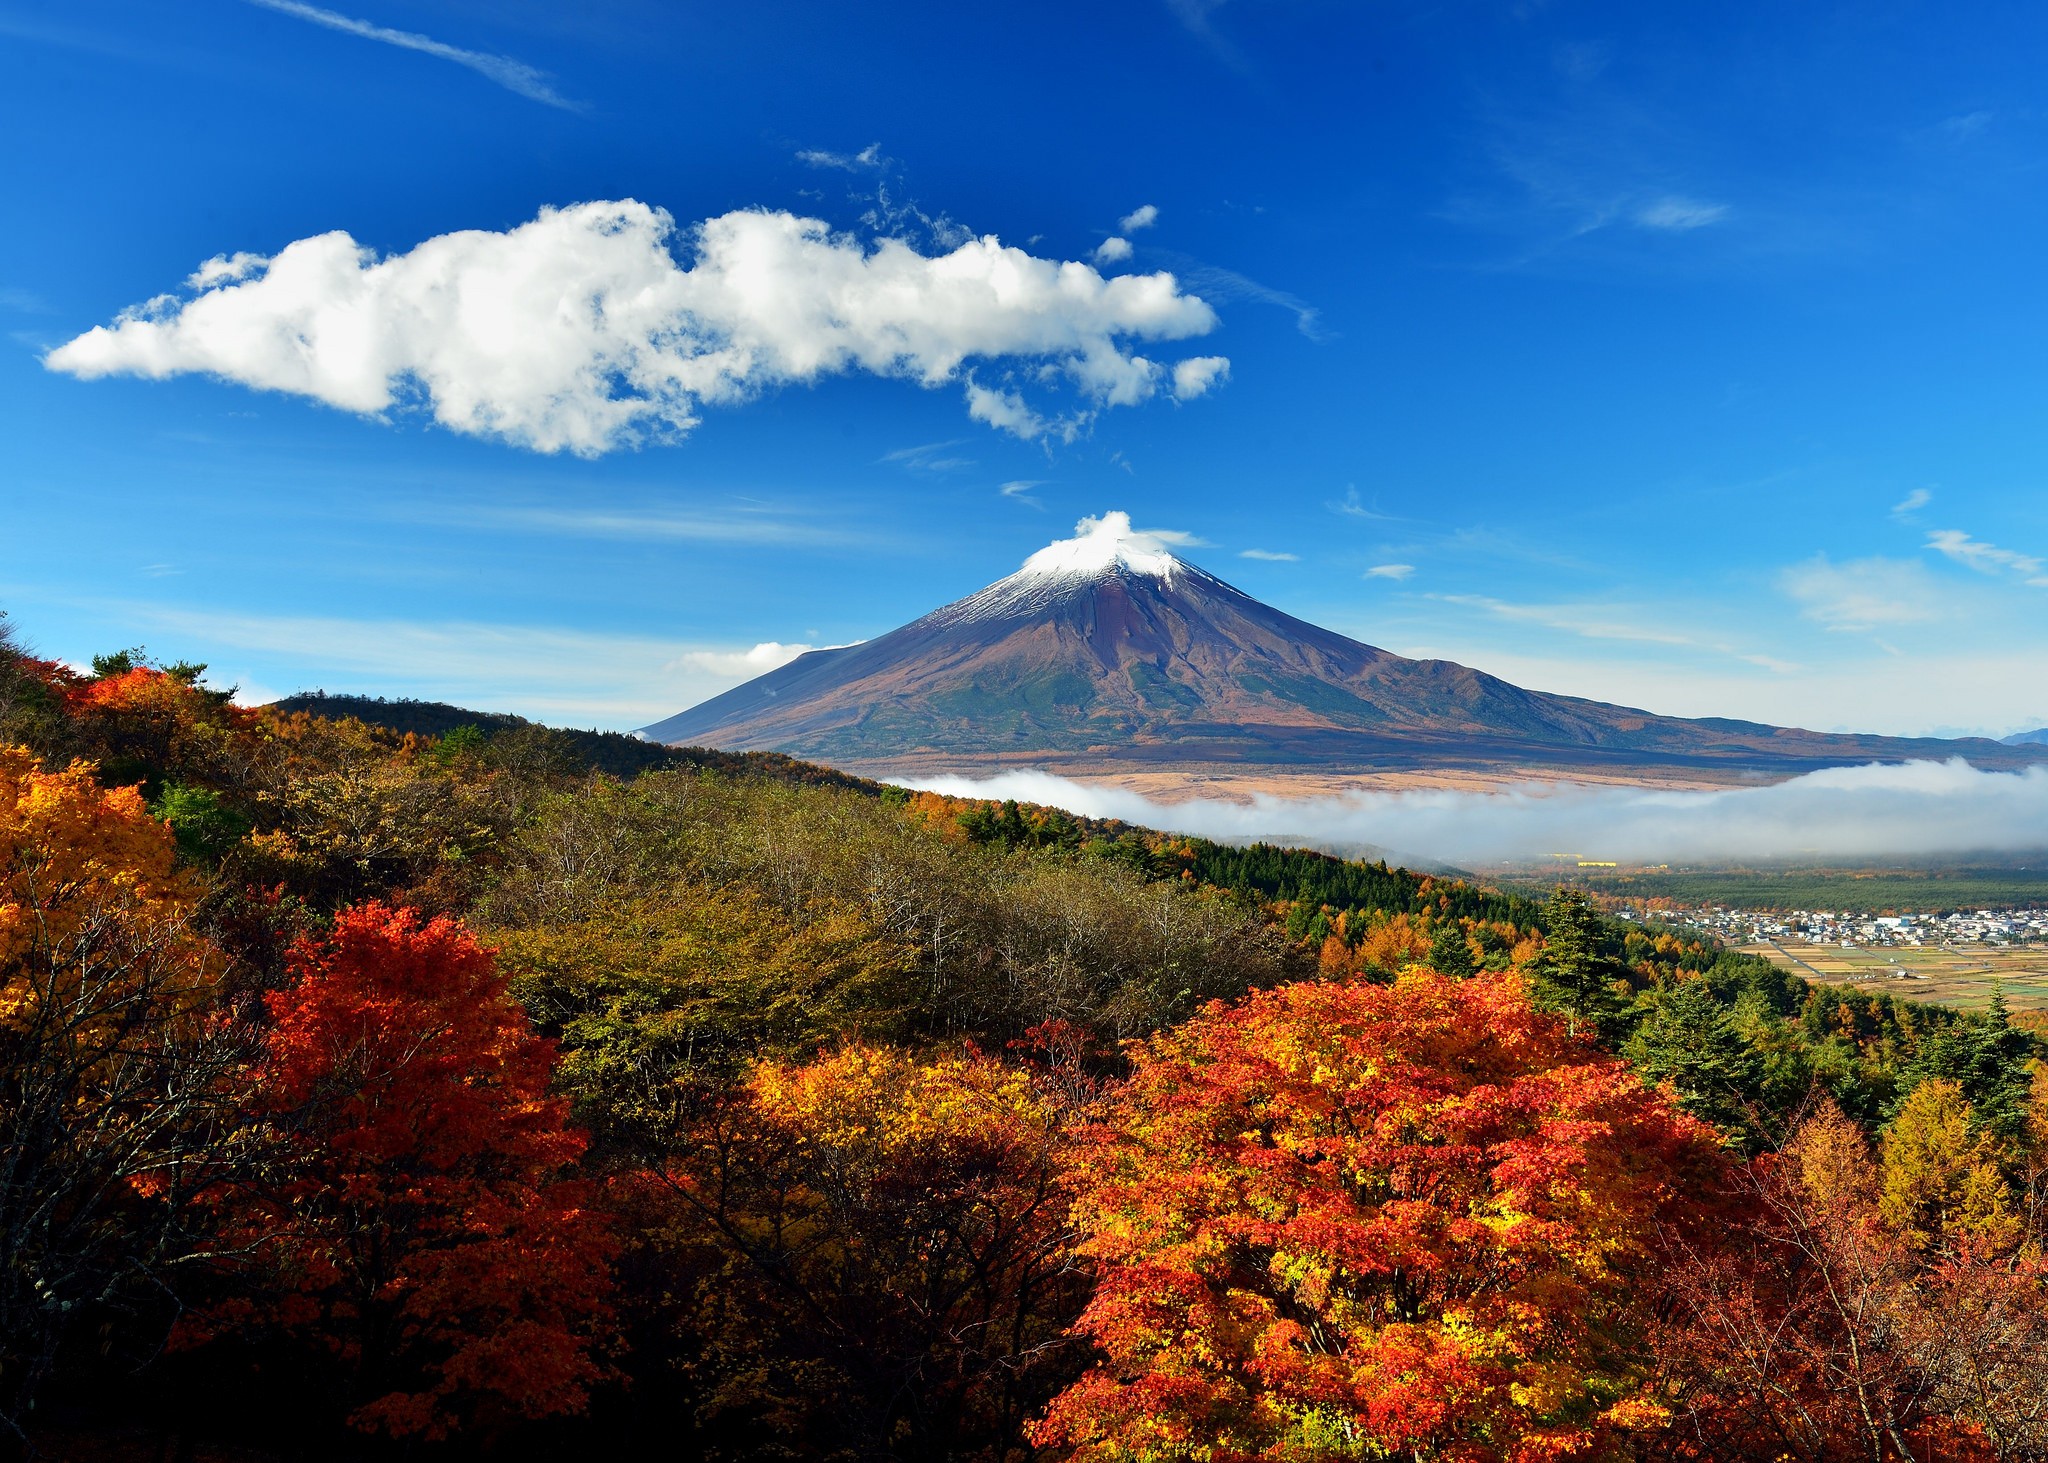 General 2048x1463 nature landscape mountains Japan Asia trees fall Mount Fuji volcano